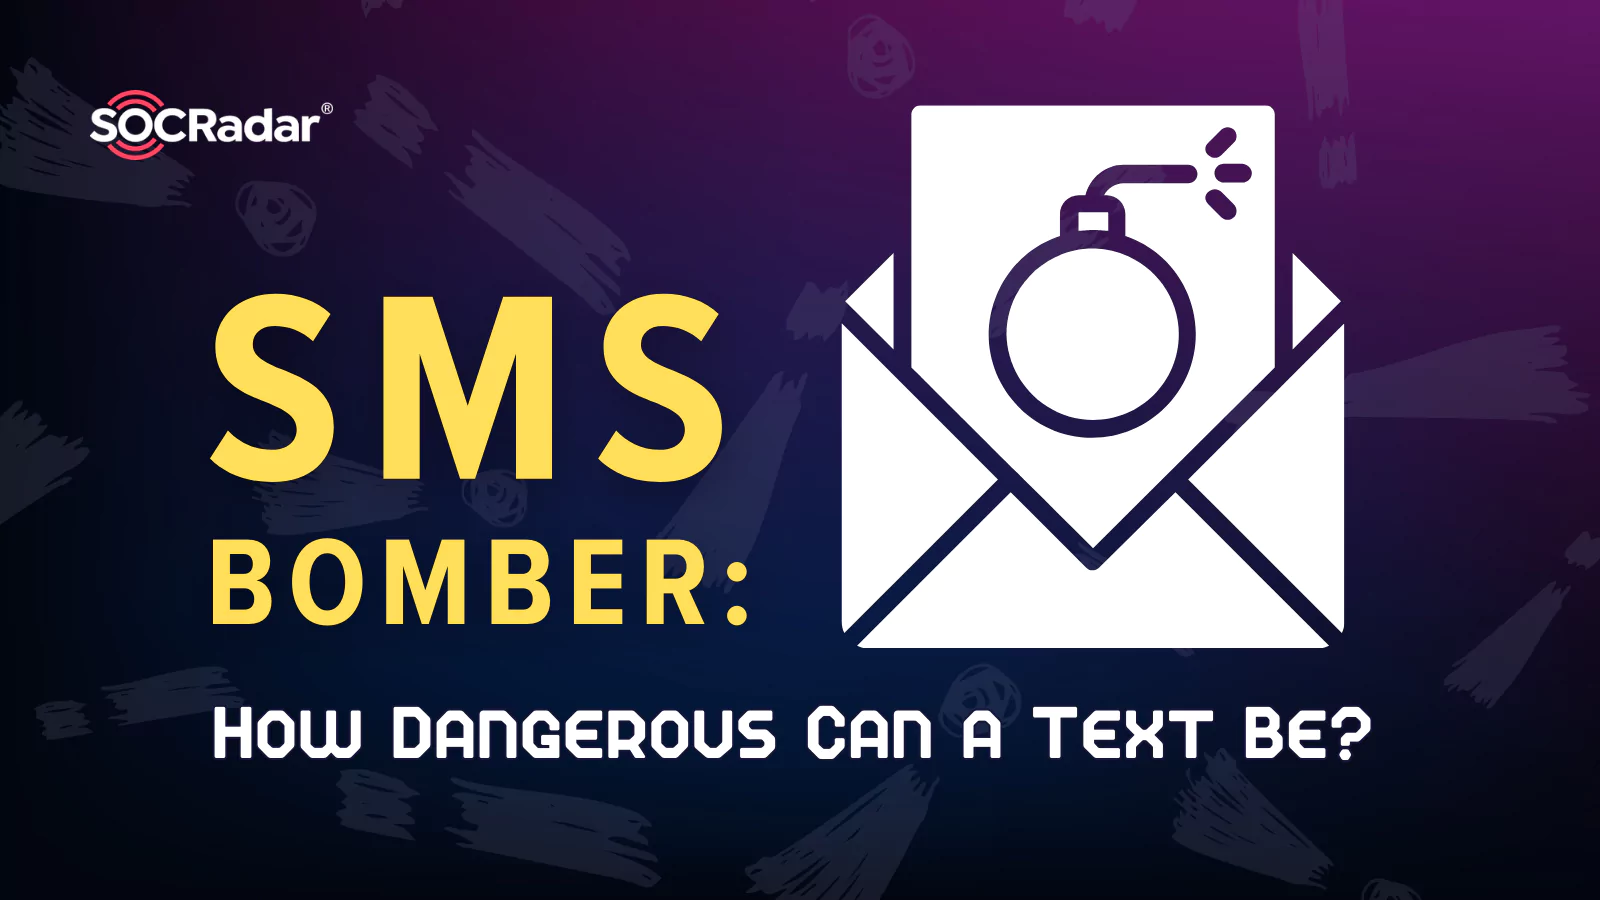 SOCRadar® Cyber Intelligence Inc. | SMS Bomber: How Dangerous Can a Text Be?